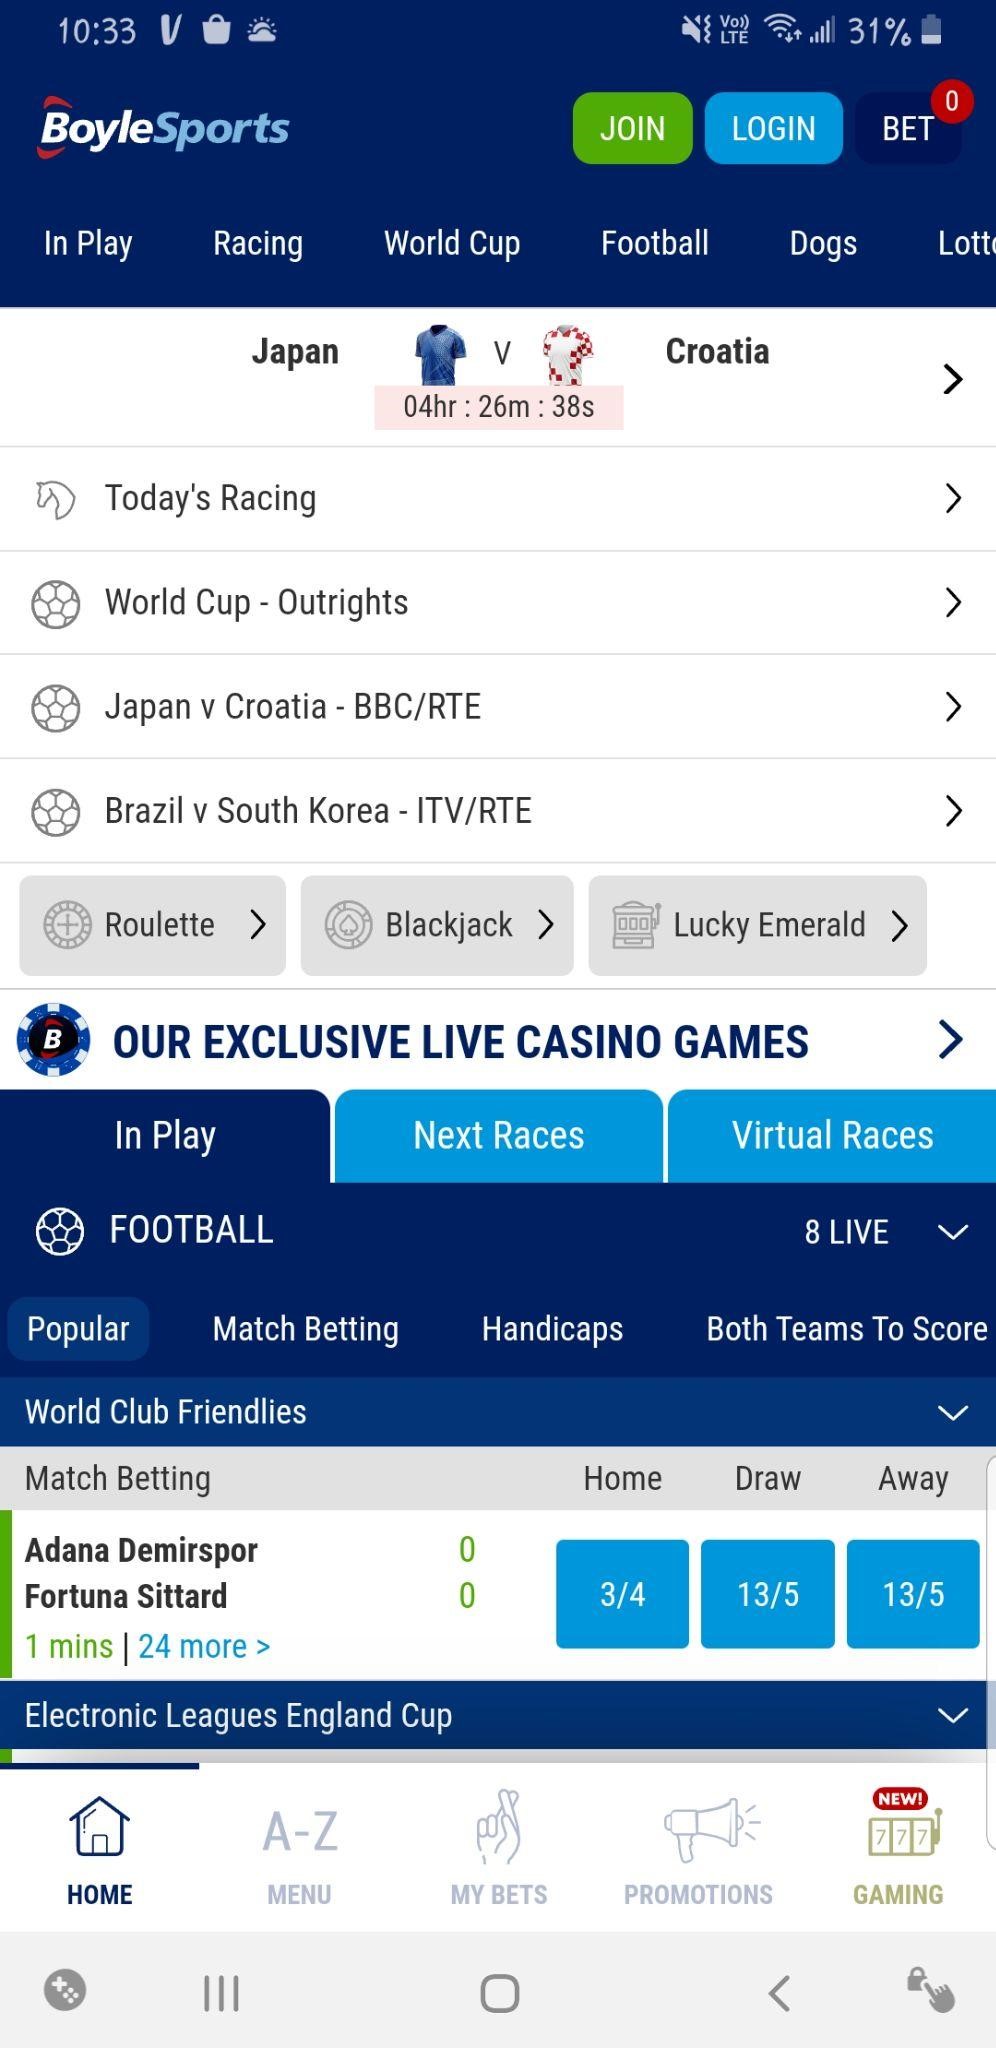 Mobile betting at BoyleSports